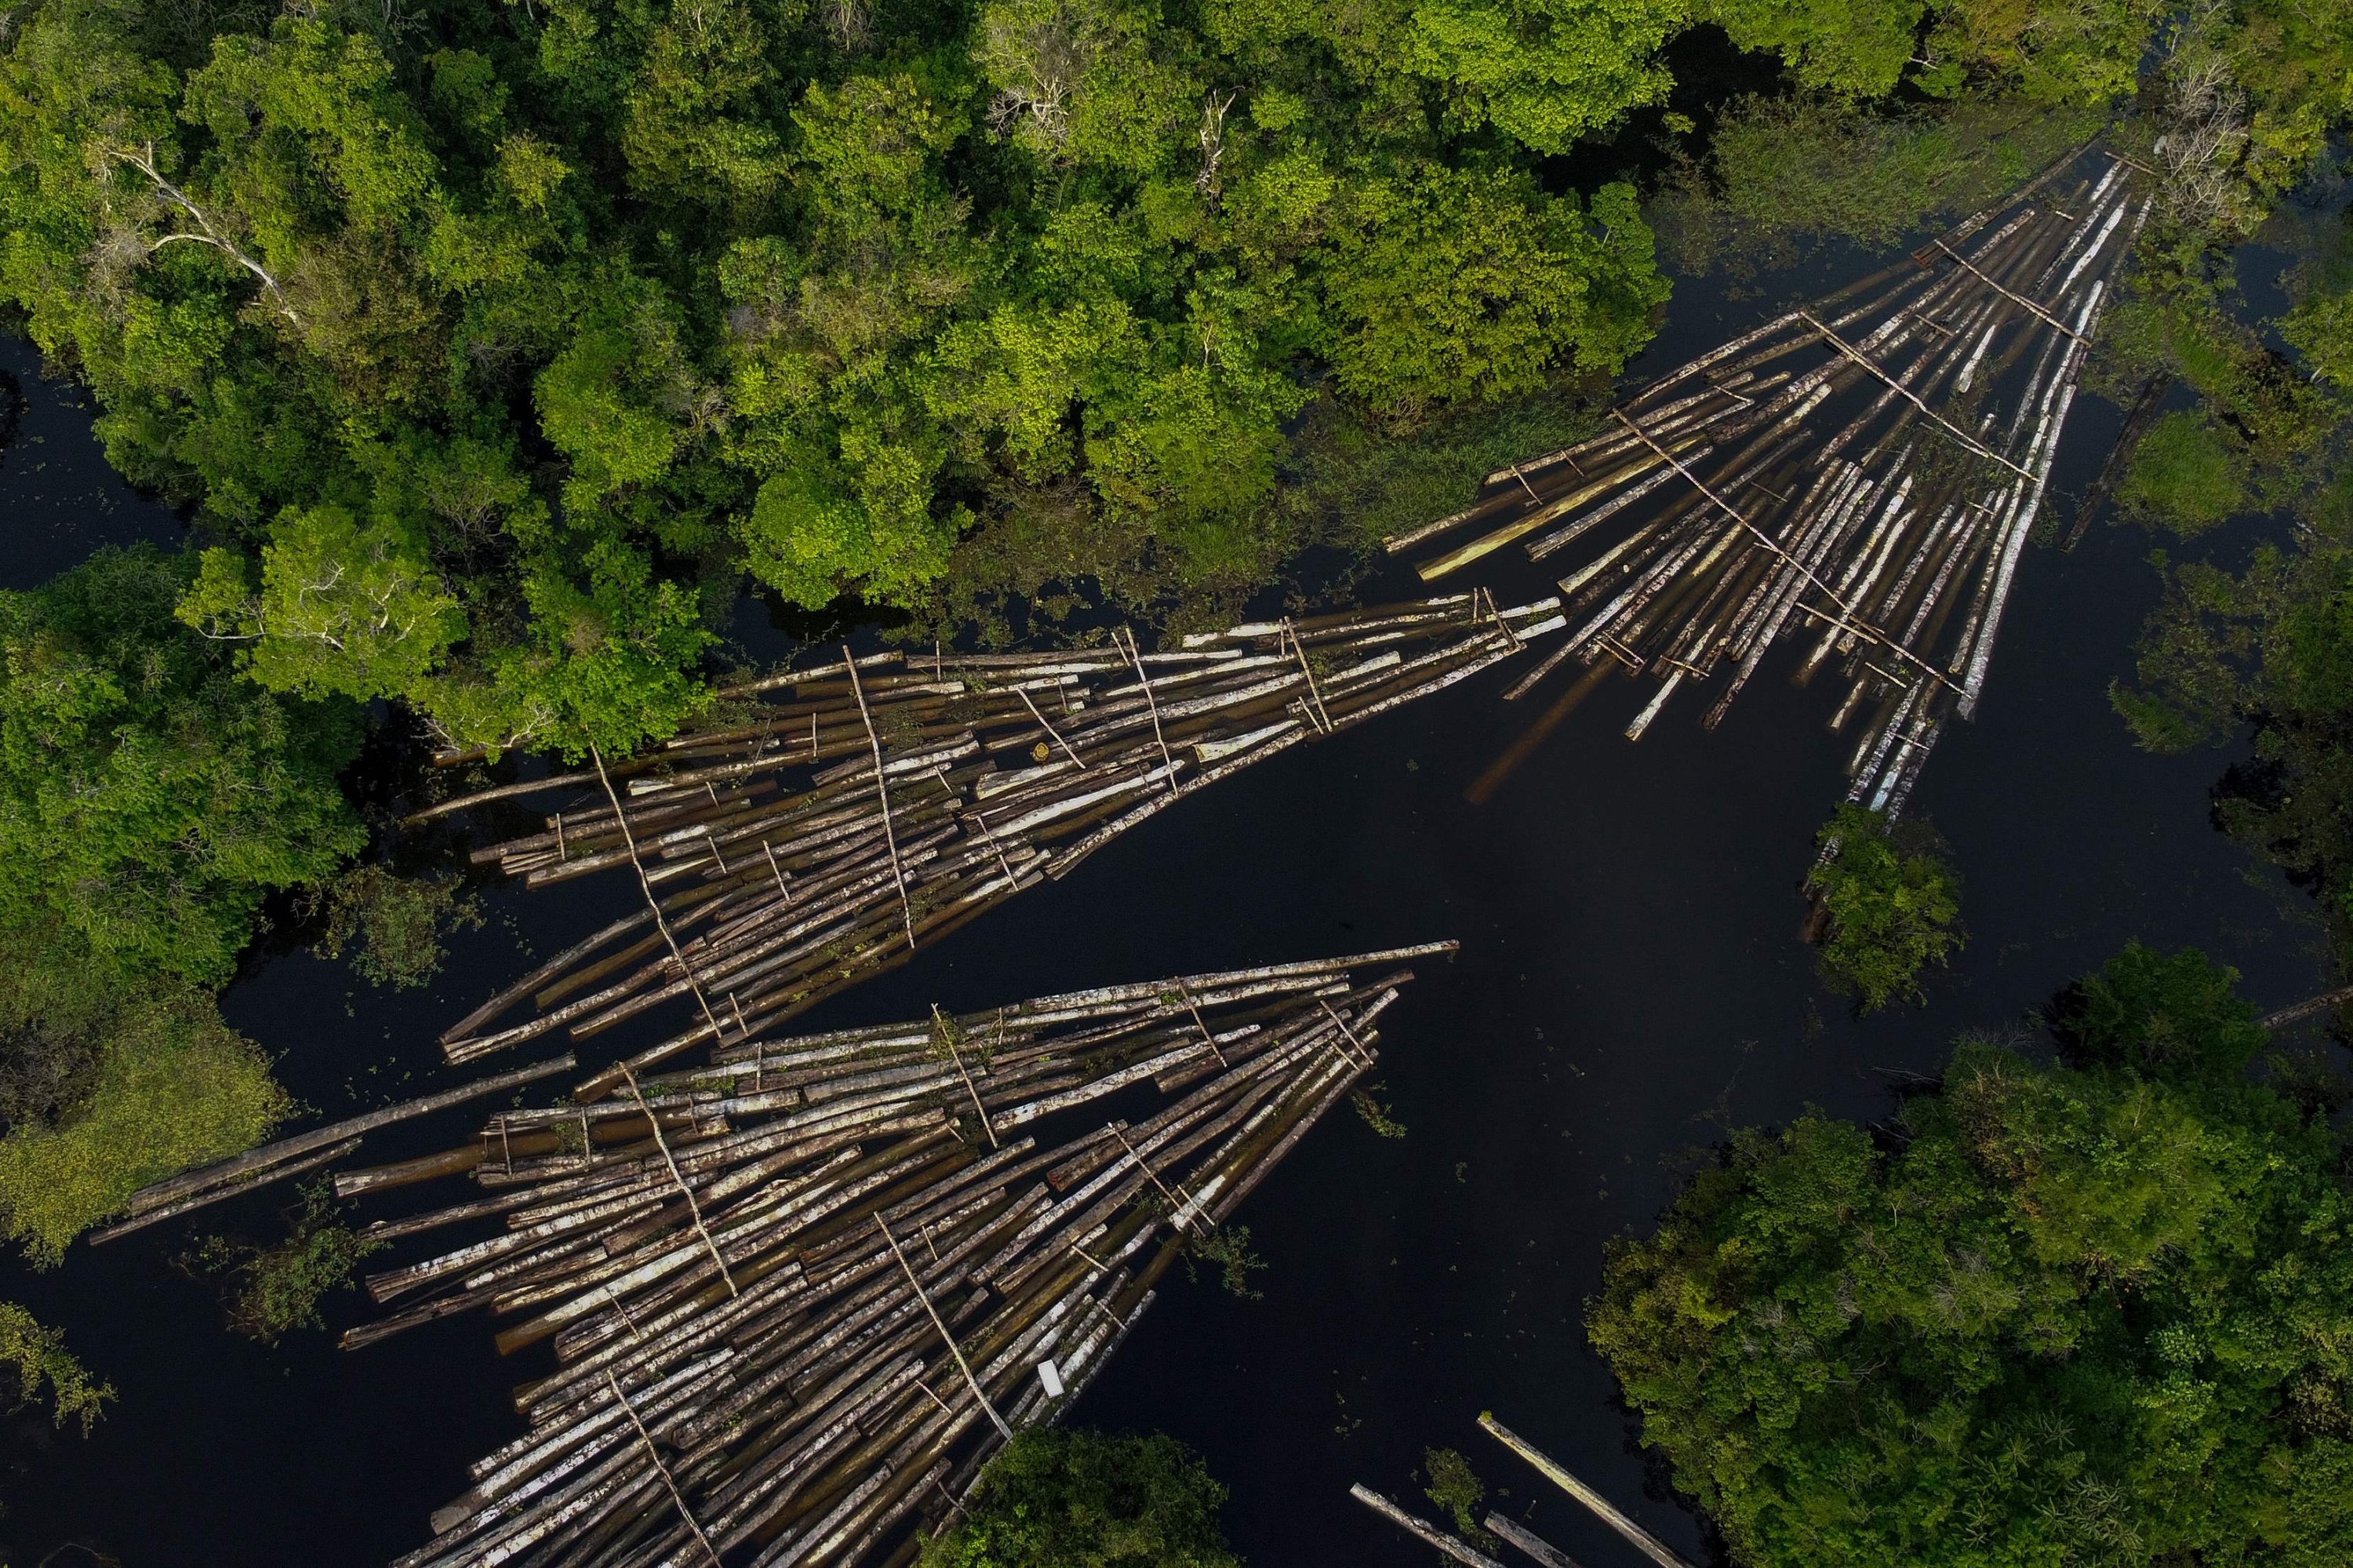 Logs of wood seized by the Amazon Military Police at the Manacapuru River in Manacupuru, Amazonas State, Brazil, July 16, 2020. (AFP Photo)